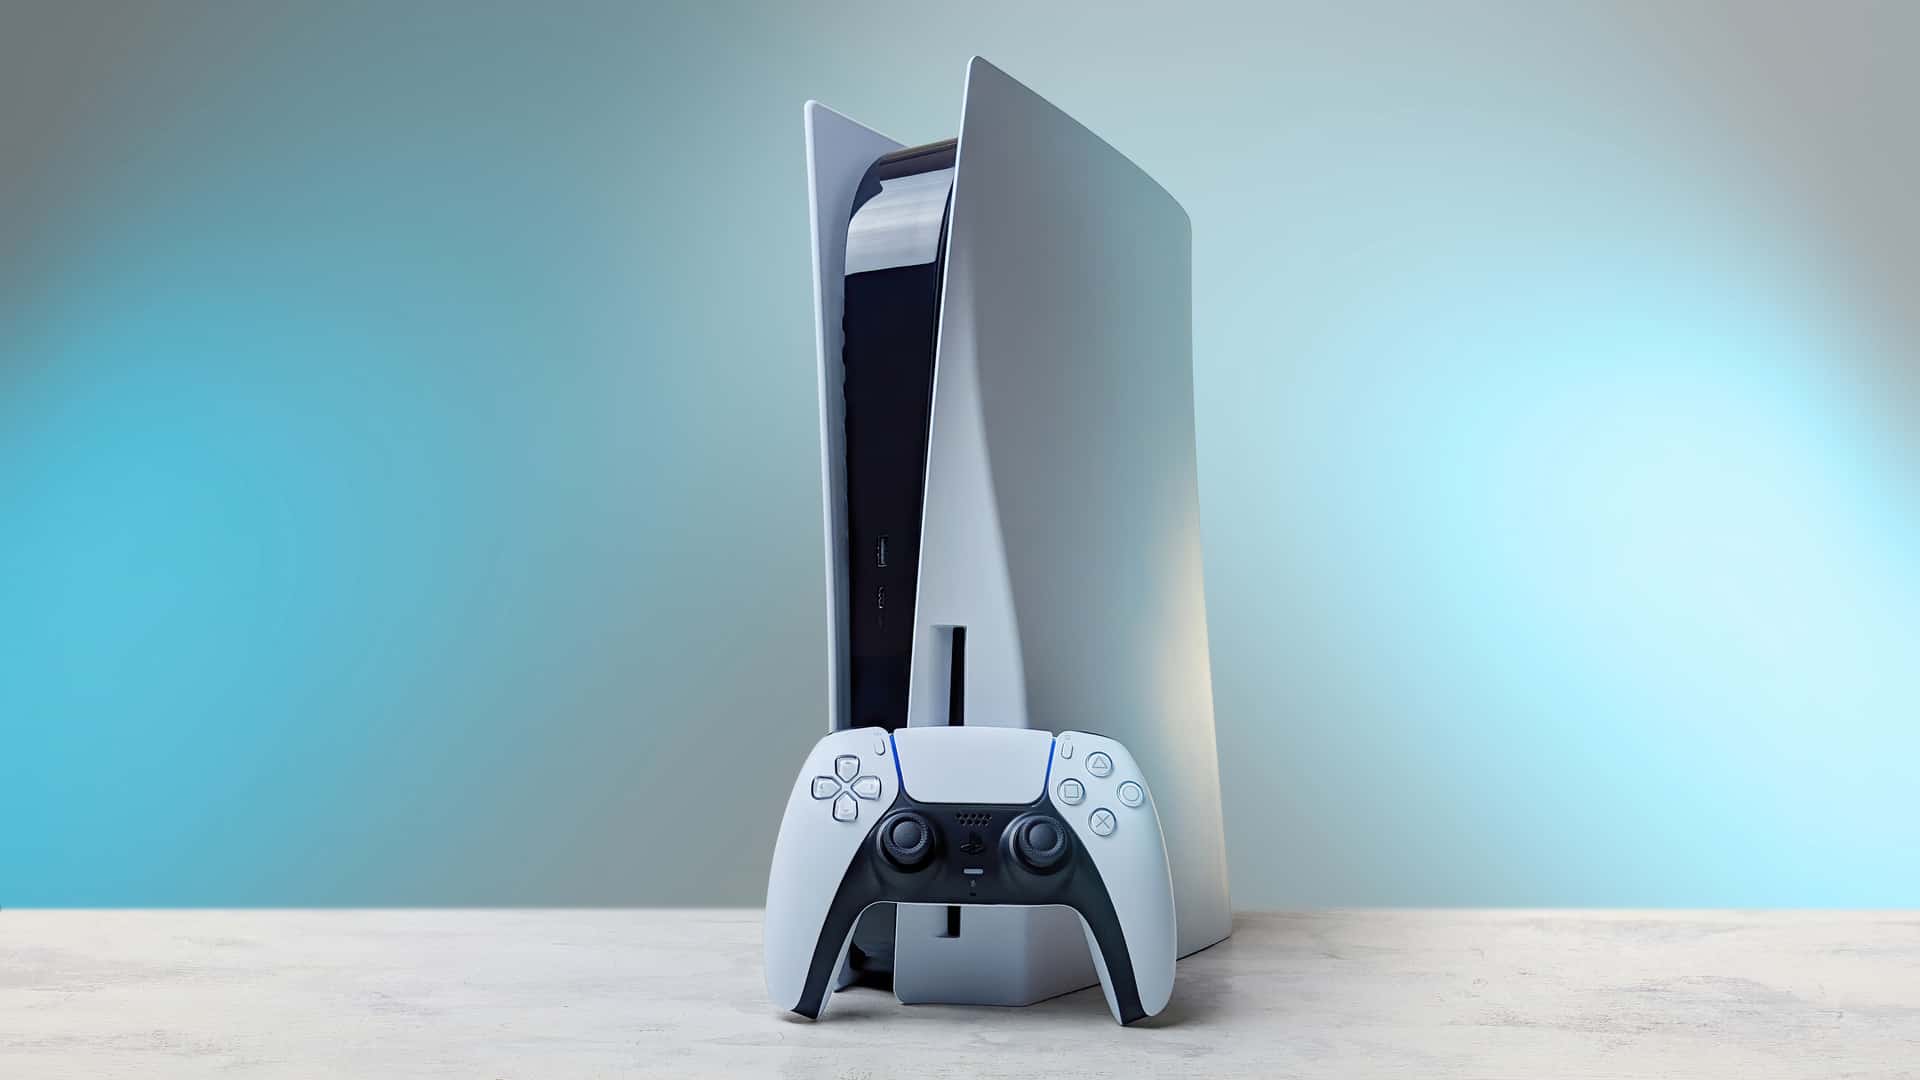 showcasing the sleek and futuristic design of the PS5, representing the next generation of gaming technology.